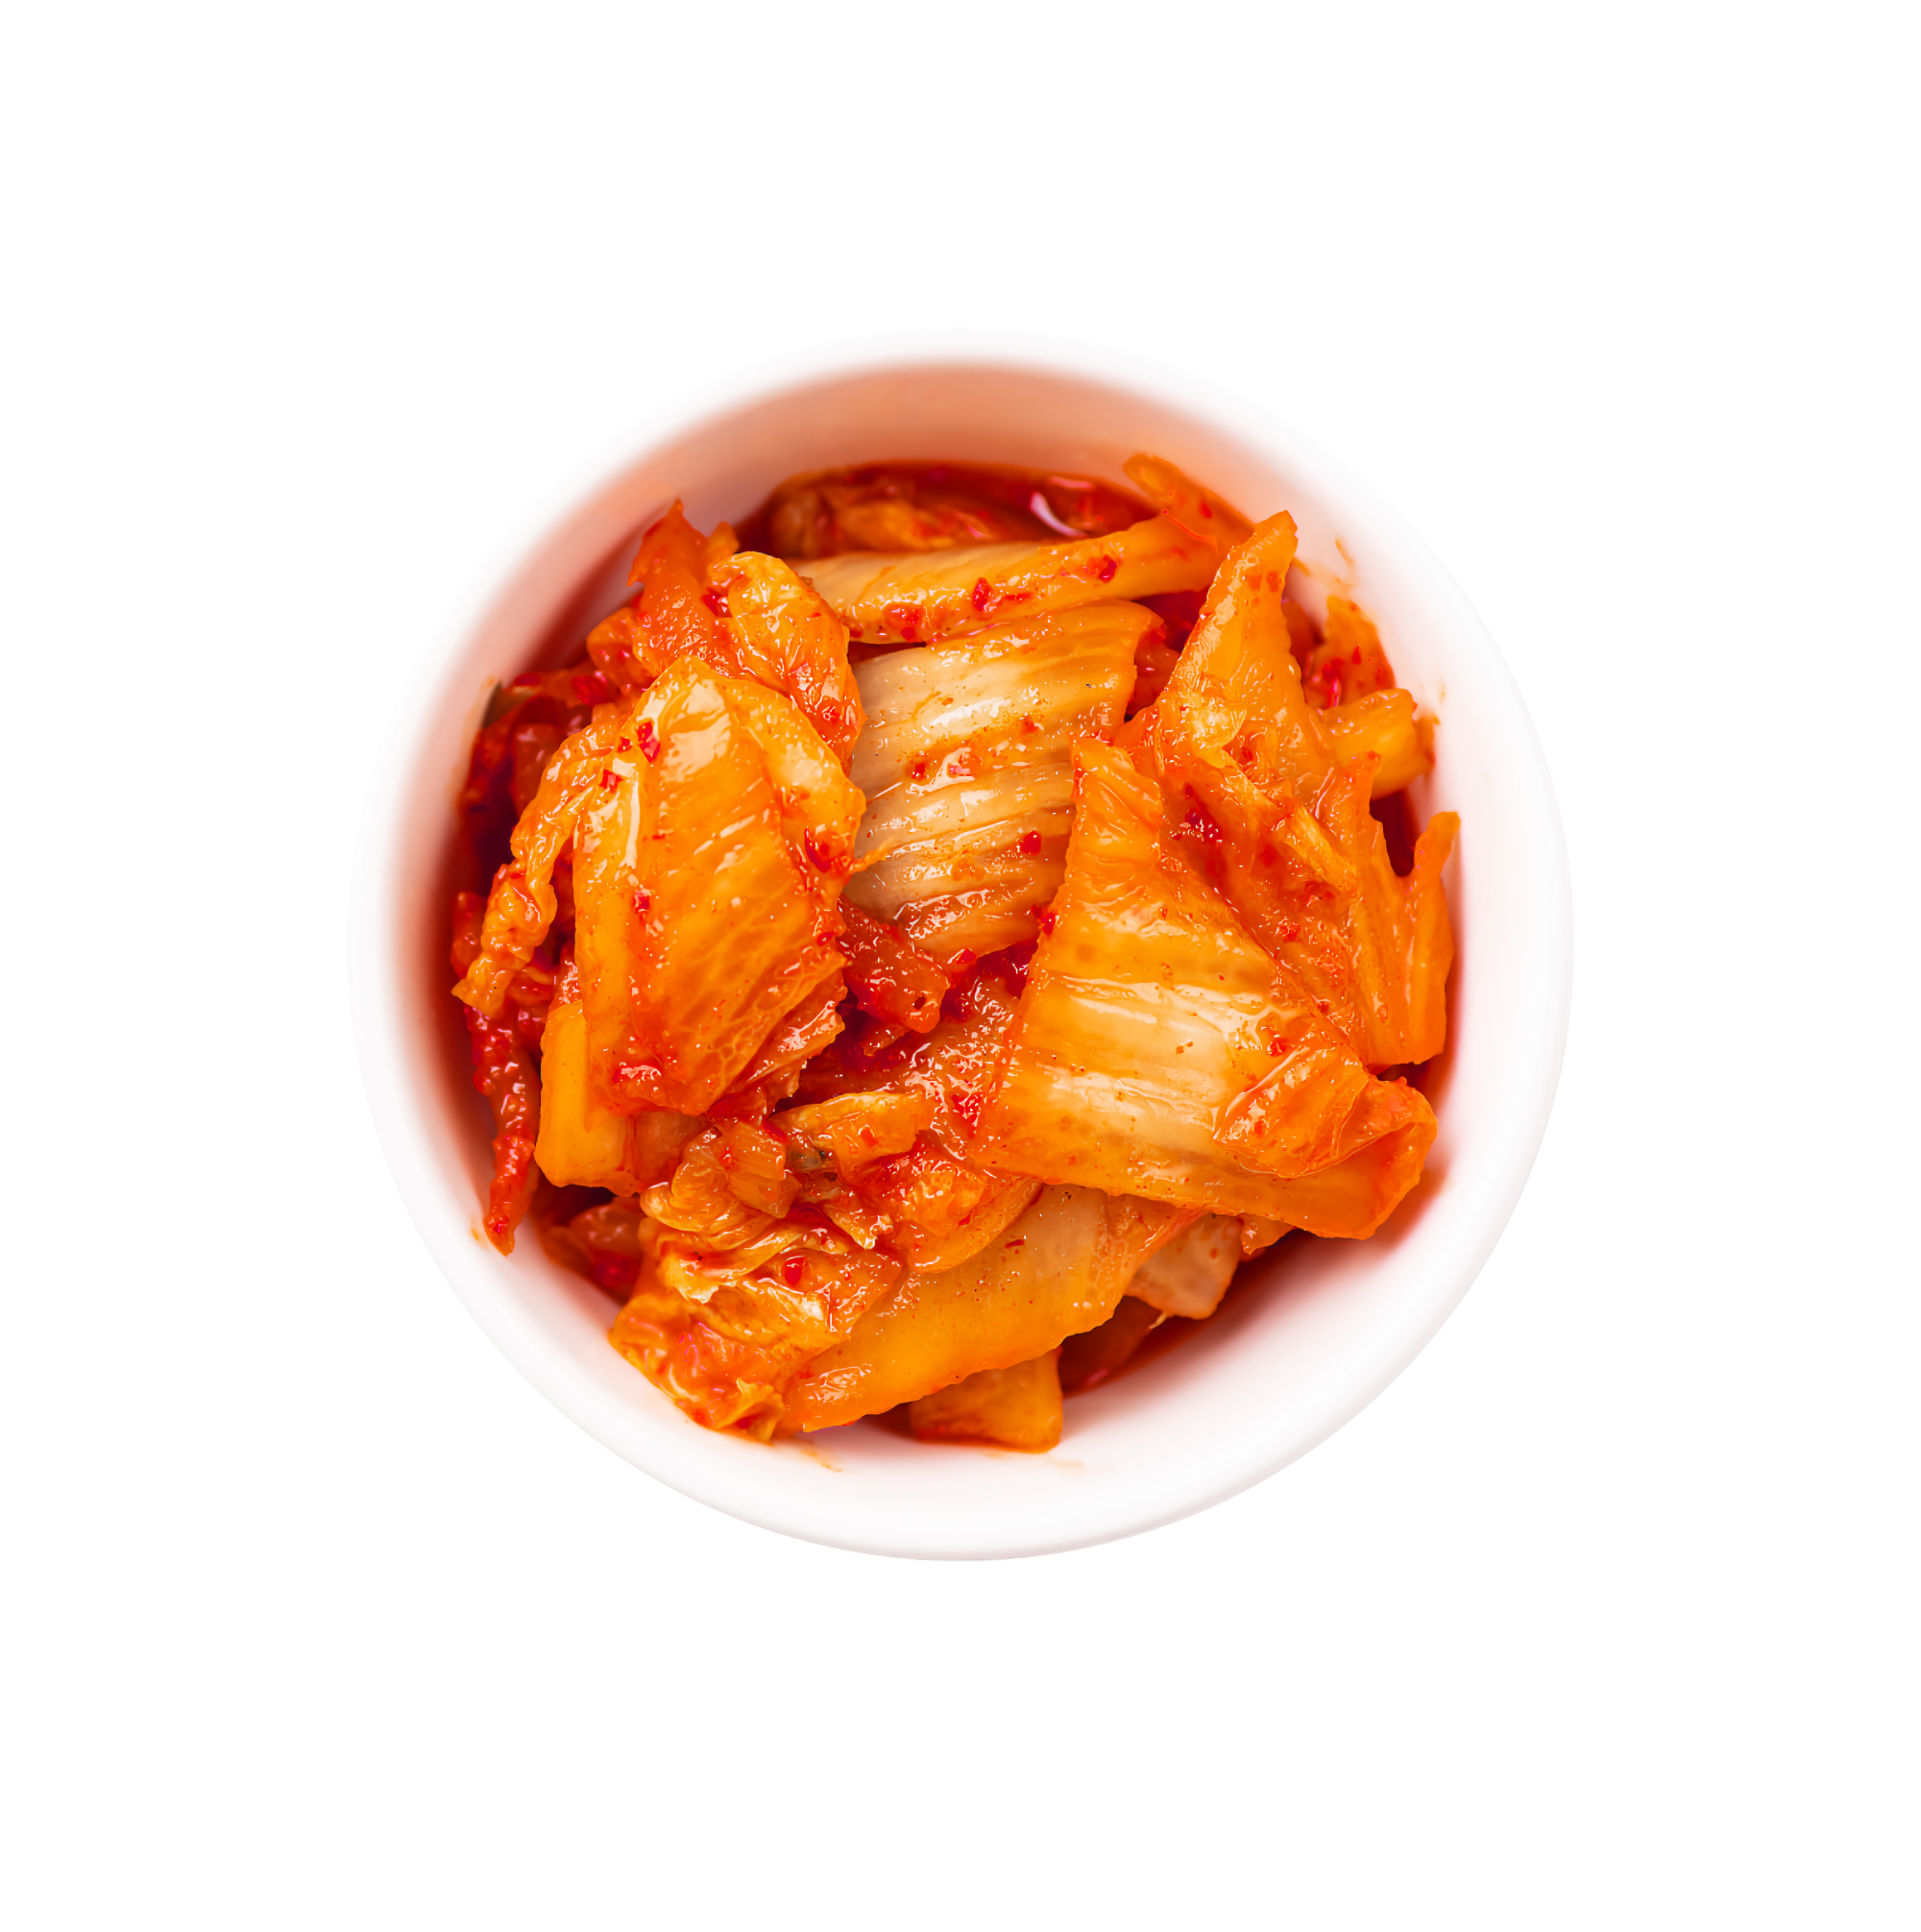 Daewoo launches smaller kimchi refrigerator for singles